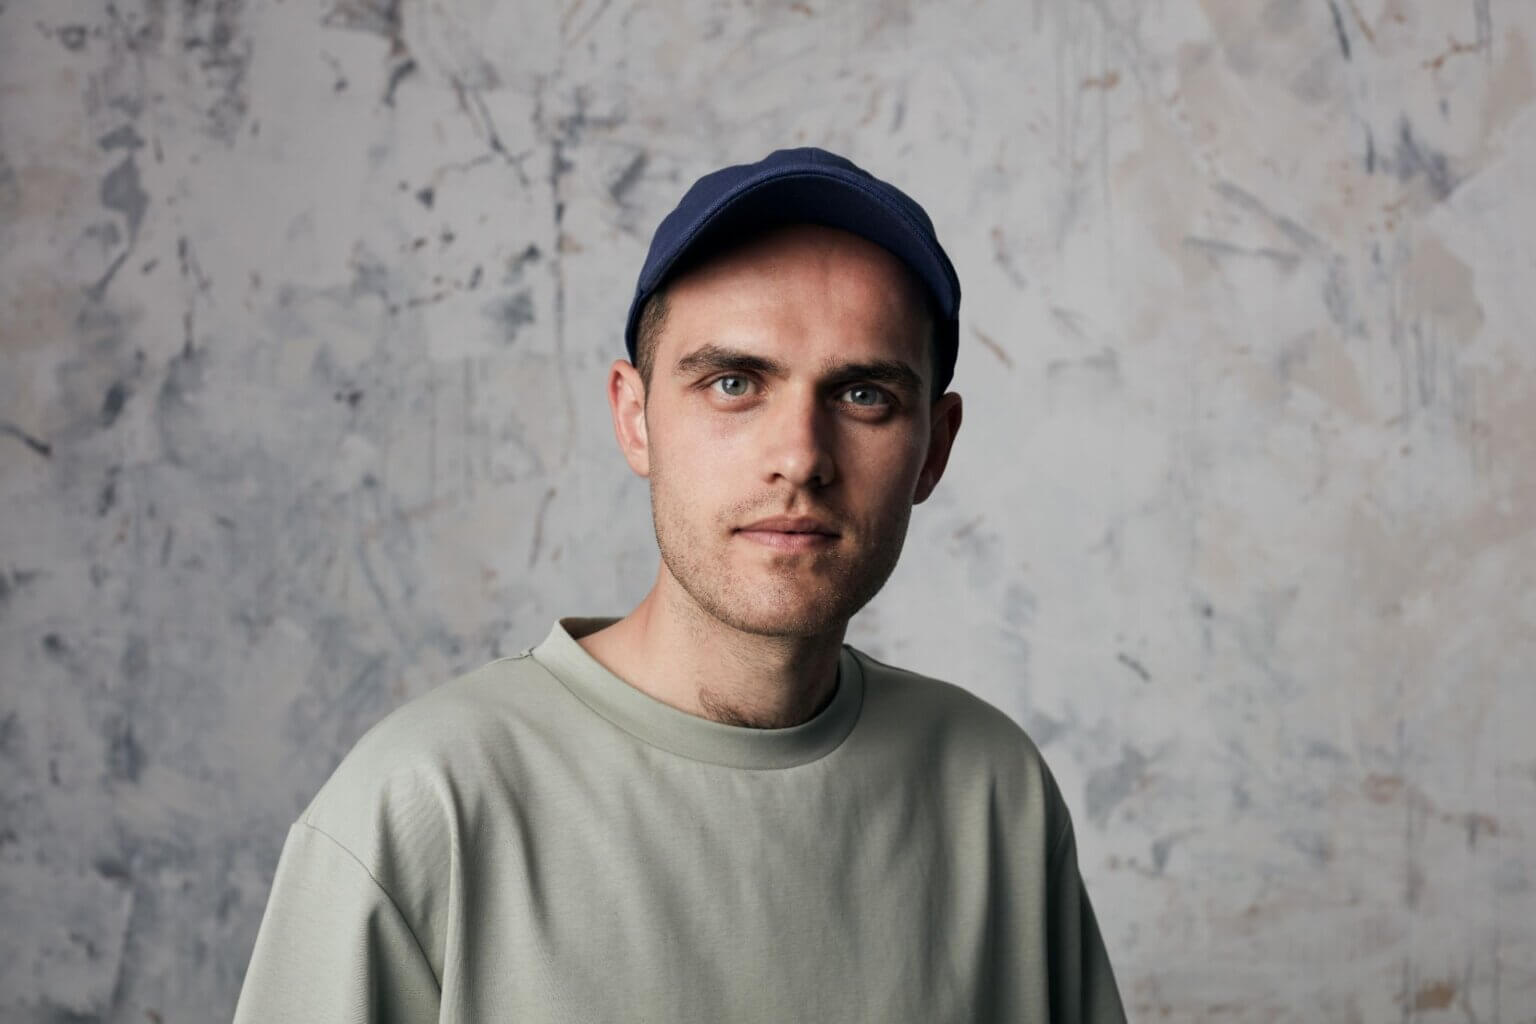 "Bruises" by Jordan Rakei is Northern Transmissions Song of the Day. The title-track is off his forthcoming release, available March 4, 2022